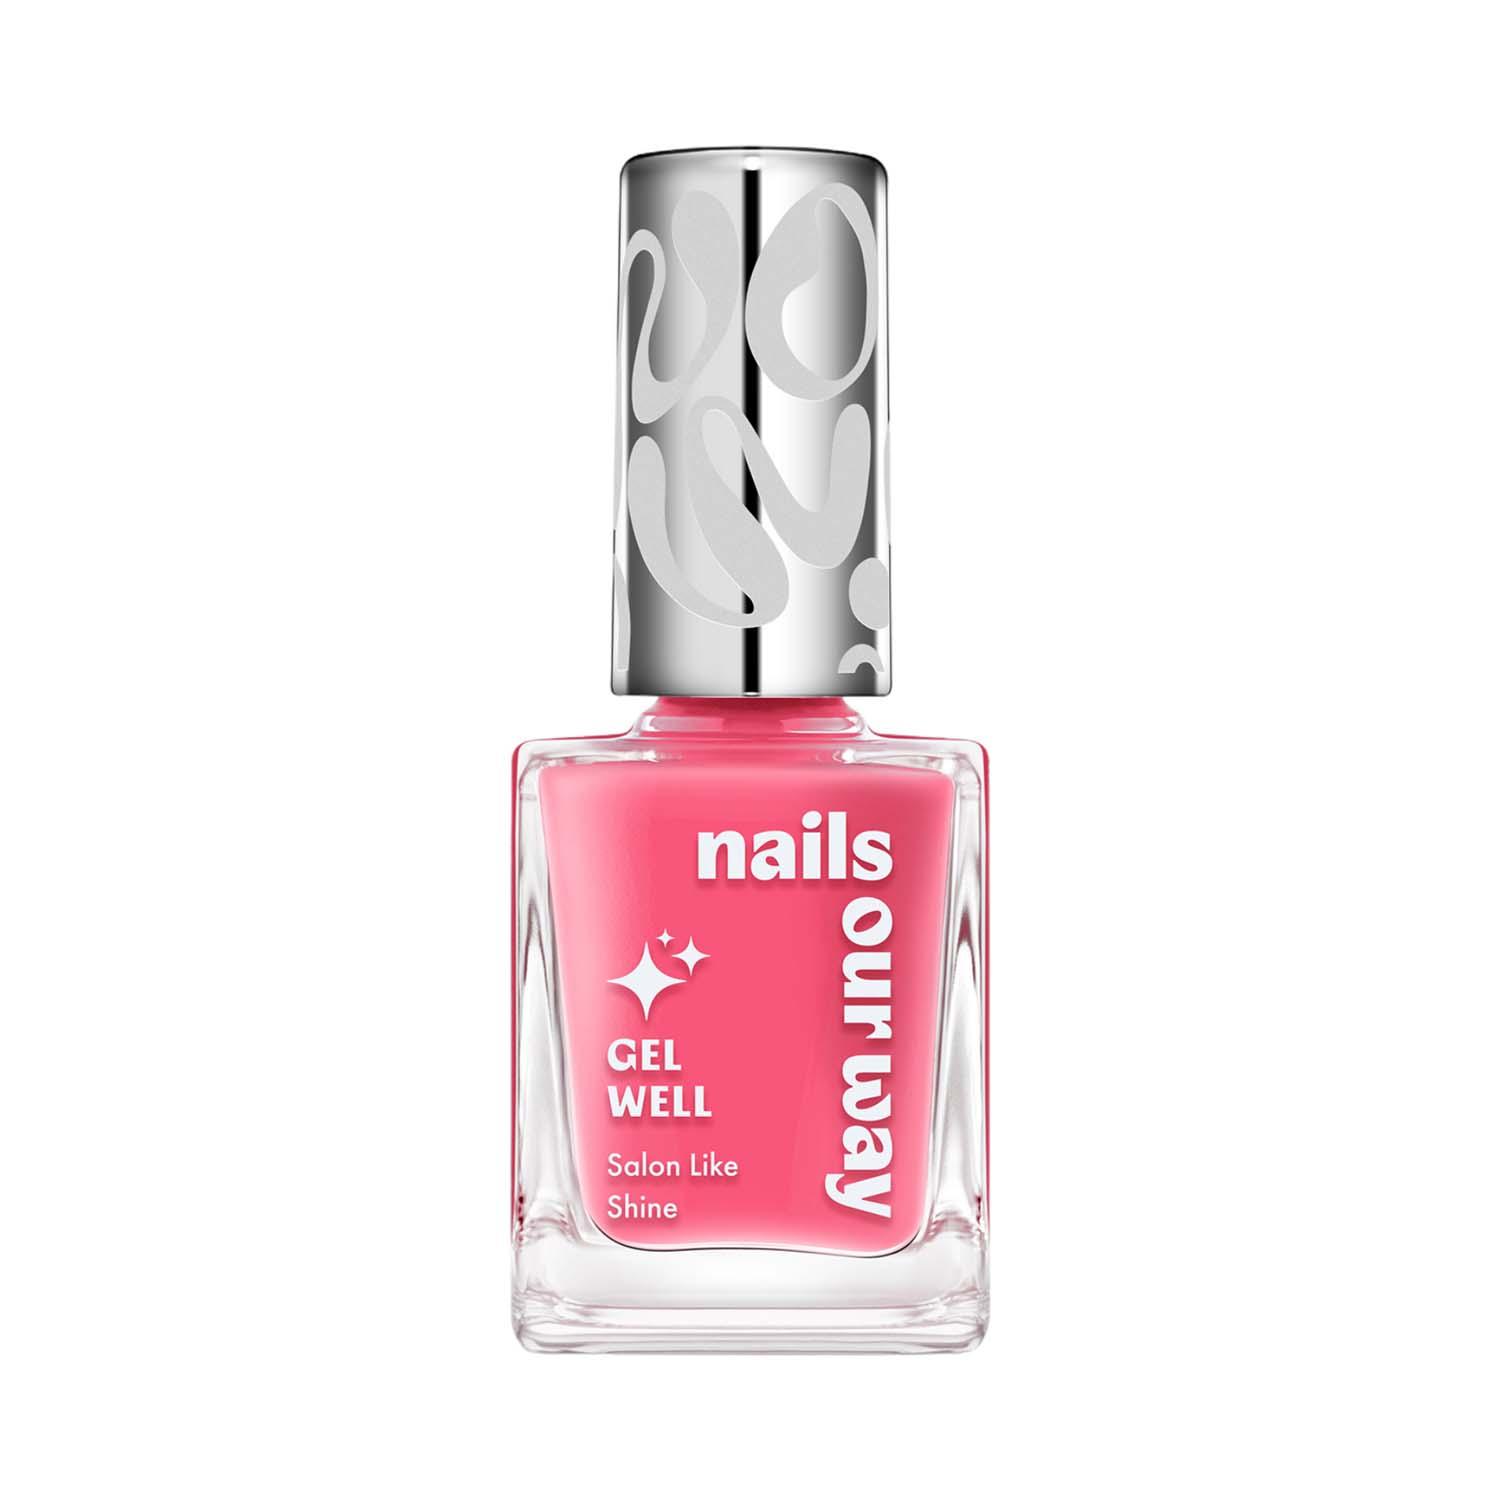 Nails Our Way | Nails Our Way Gel Well Nail Enamel - 207 Childlike (10 ml)